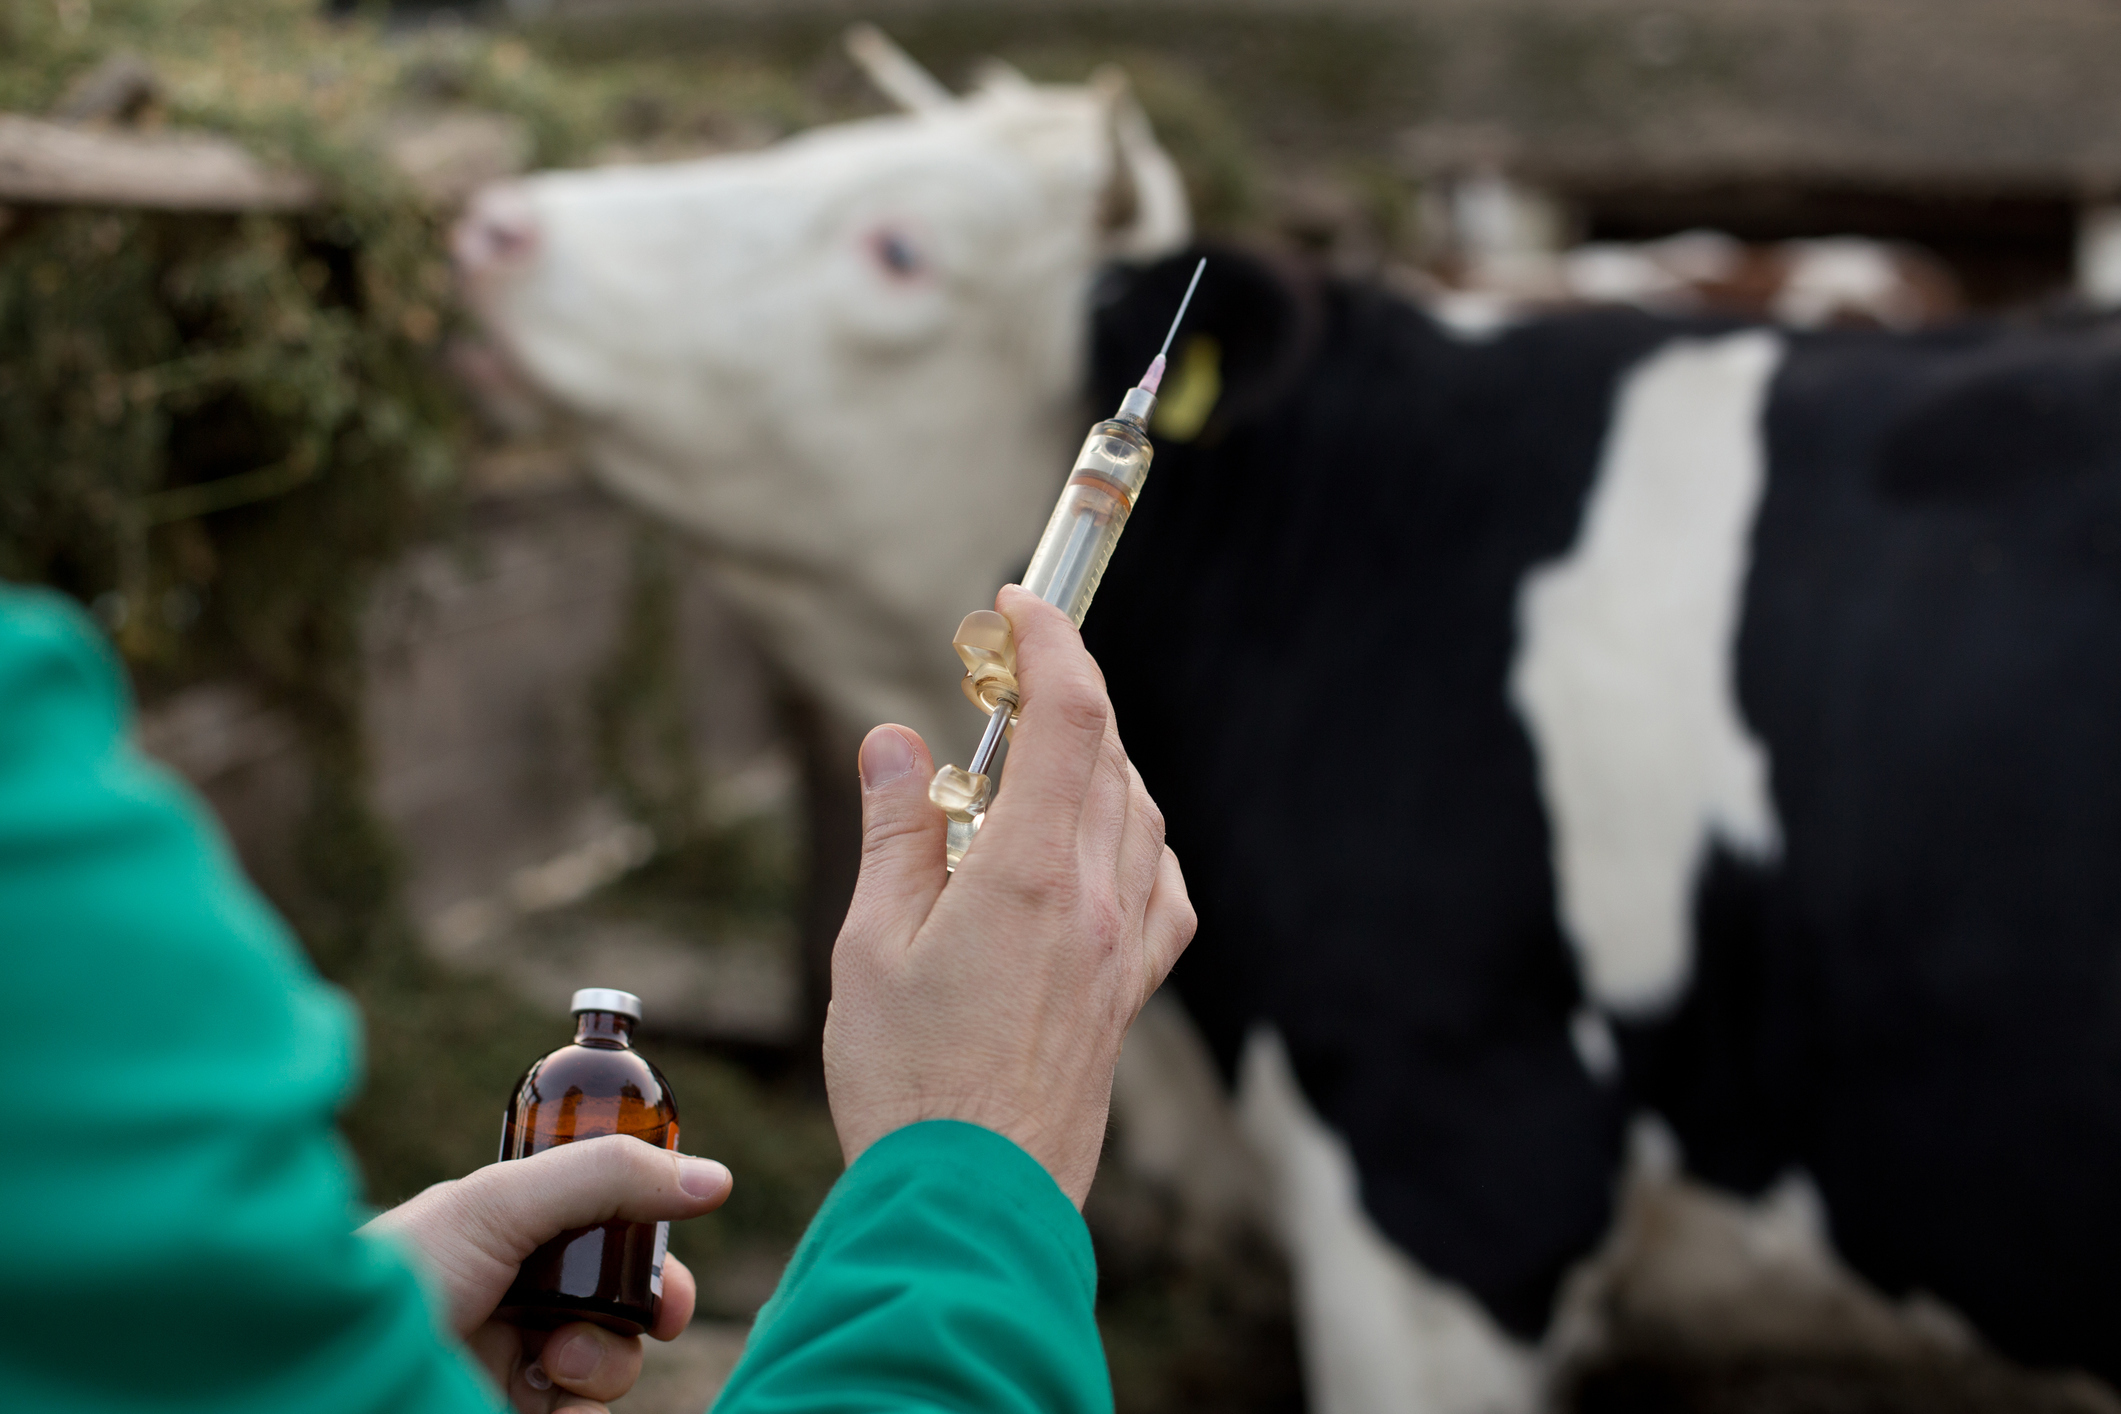 Chief Veterinary Officer Sheila Voas said there were many actions farmers and vets could consider to reduce the use of antibiotics in livestock.